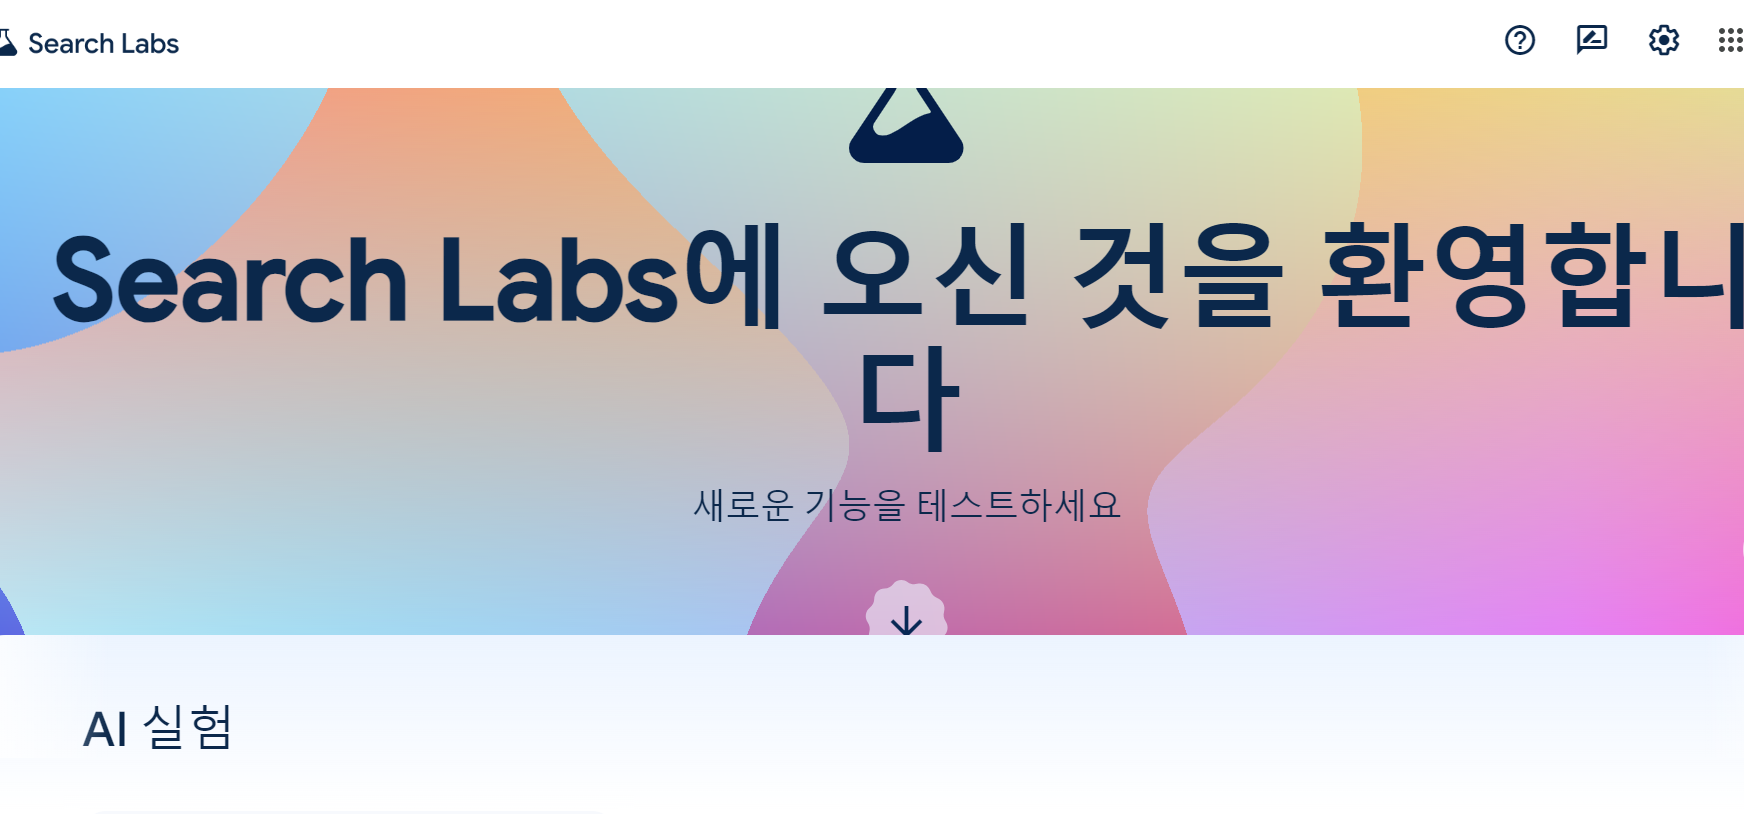 SearchLabs